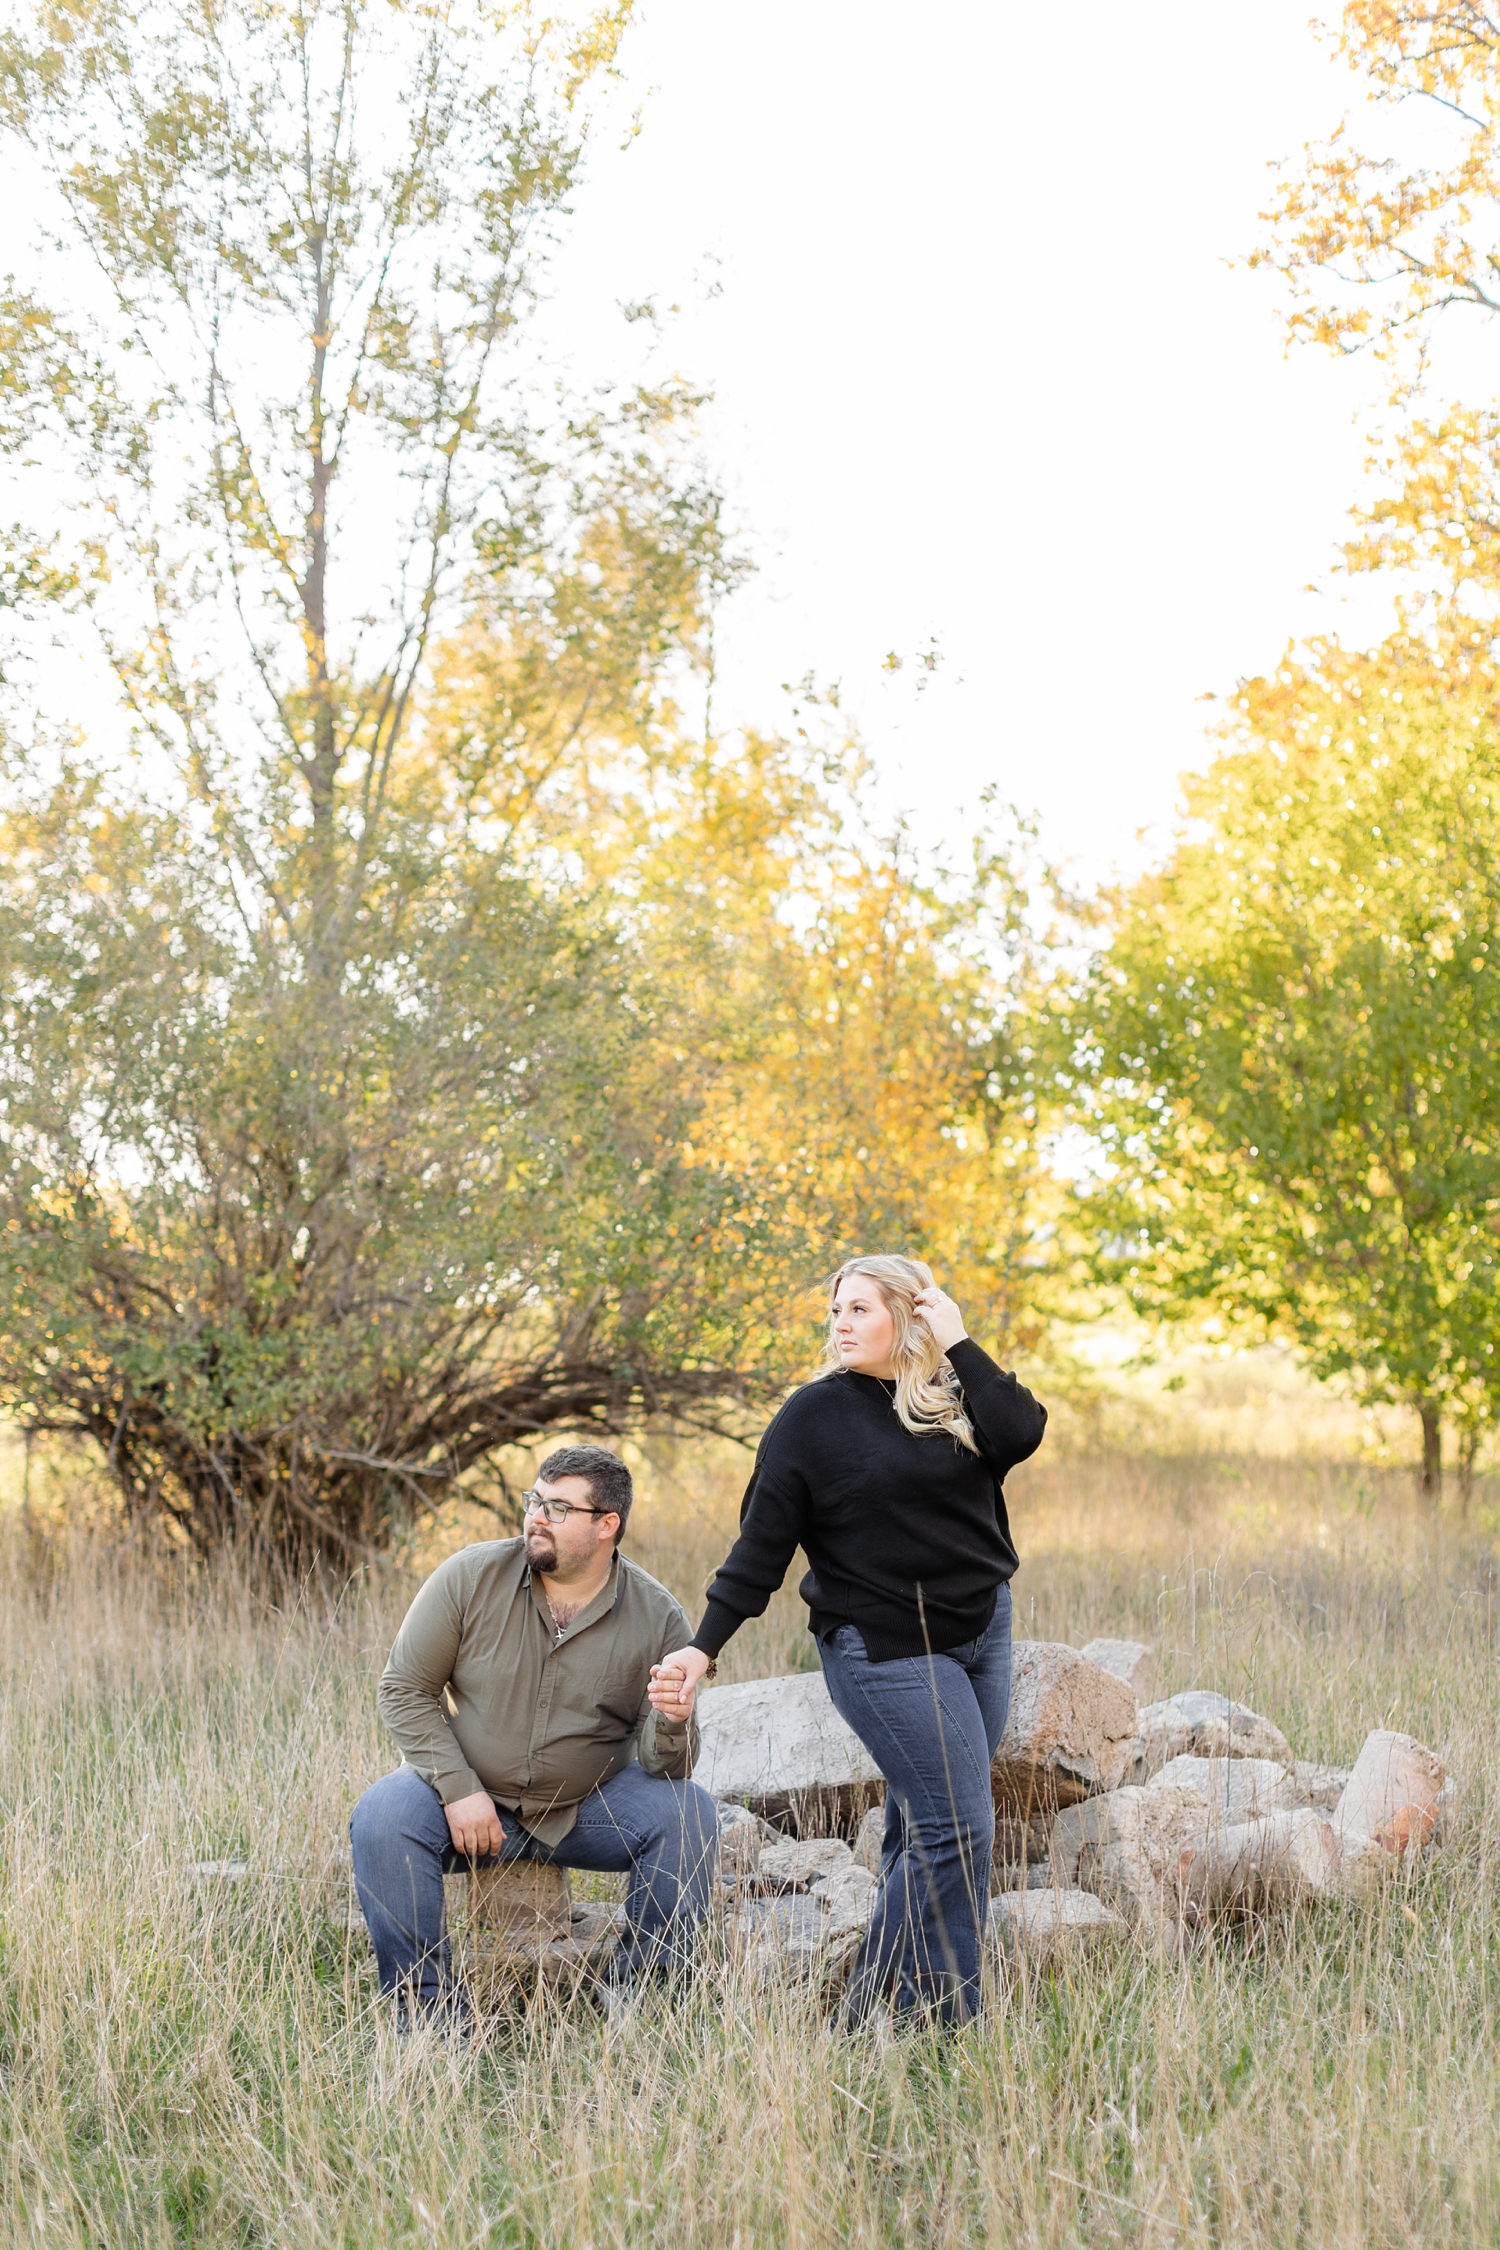 Nicks on a rock pile while Halie holds his hand as they look off in the distance in the middle of a grassy pasture | CB Studio